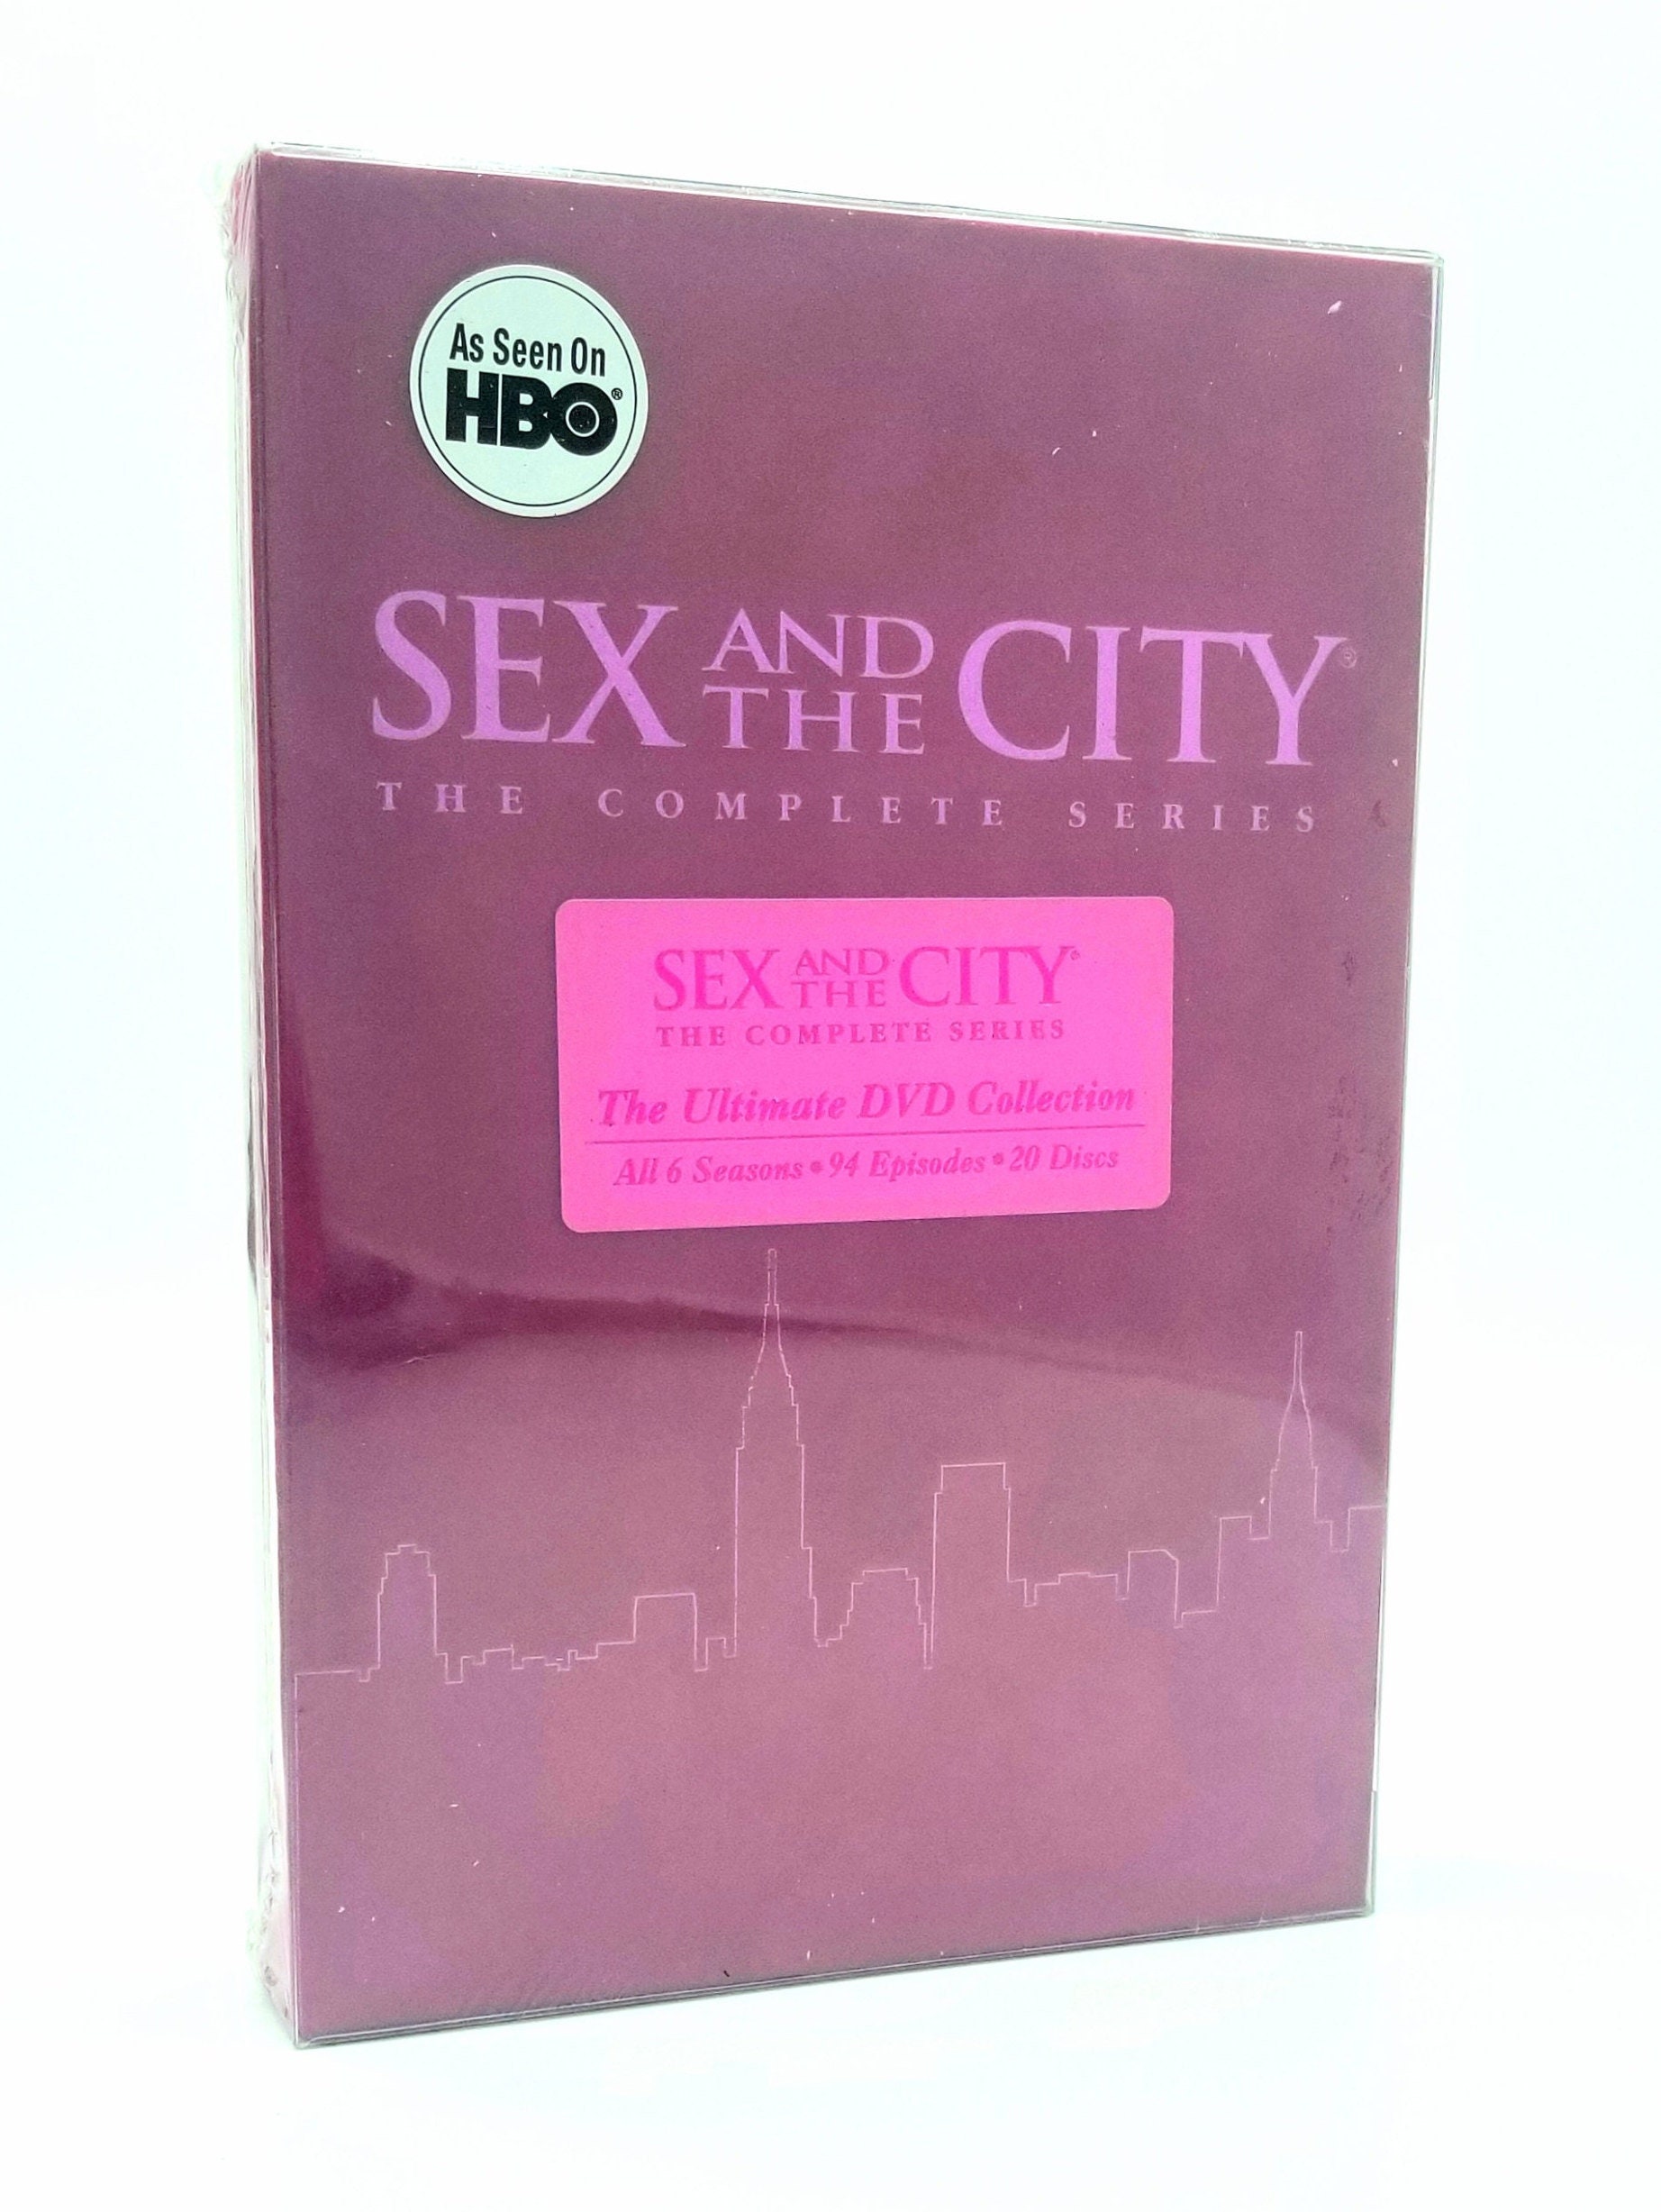 Sex and the City - The Complete Series Box Set - DVD - Sealed